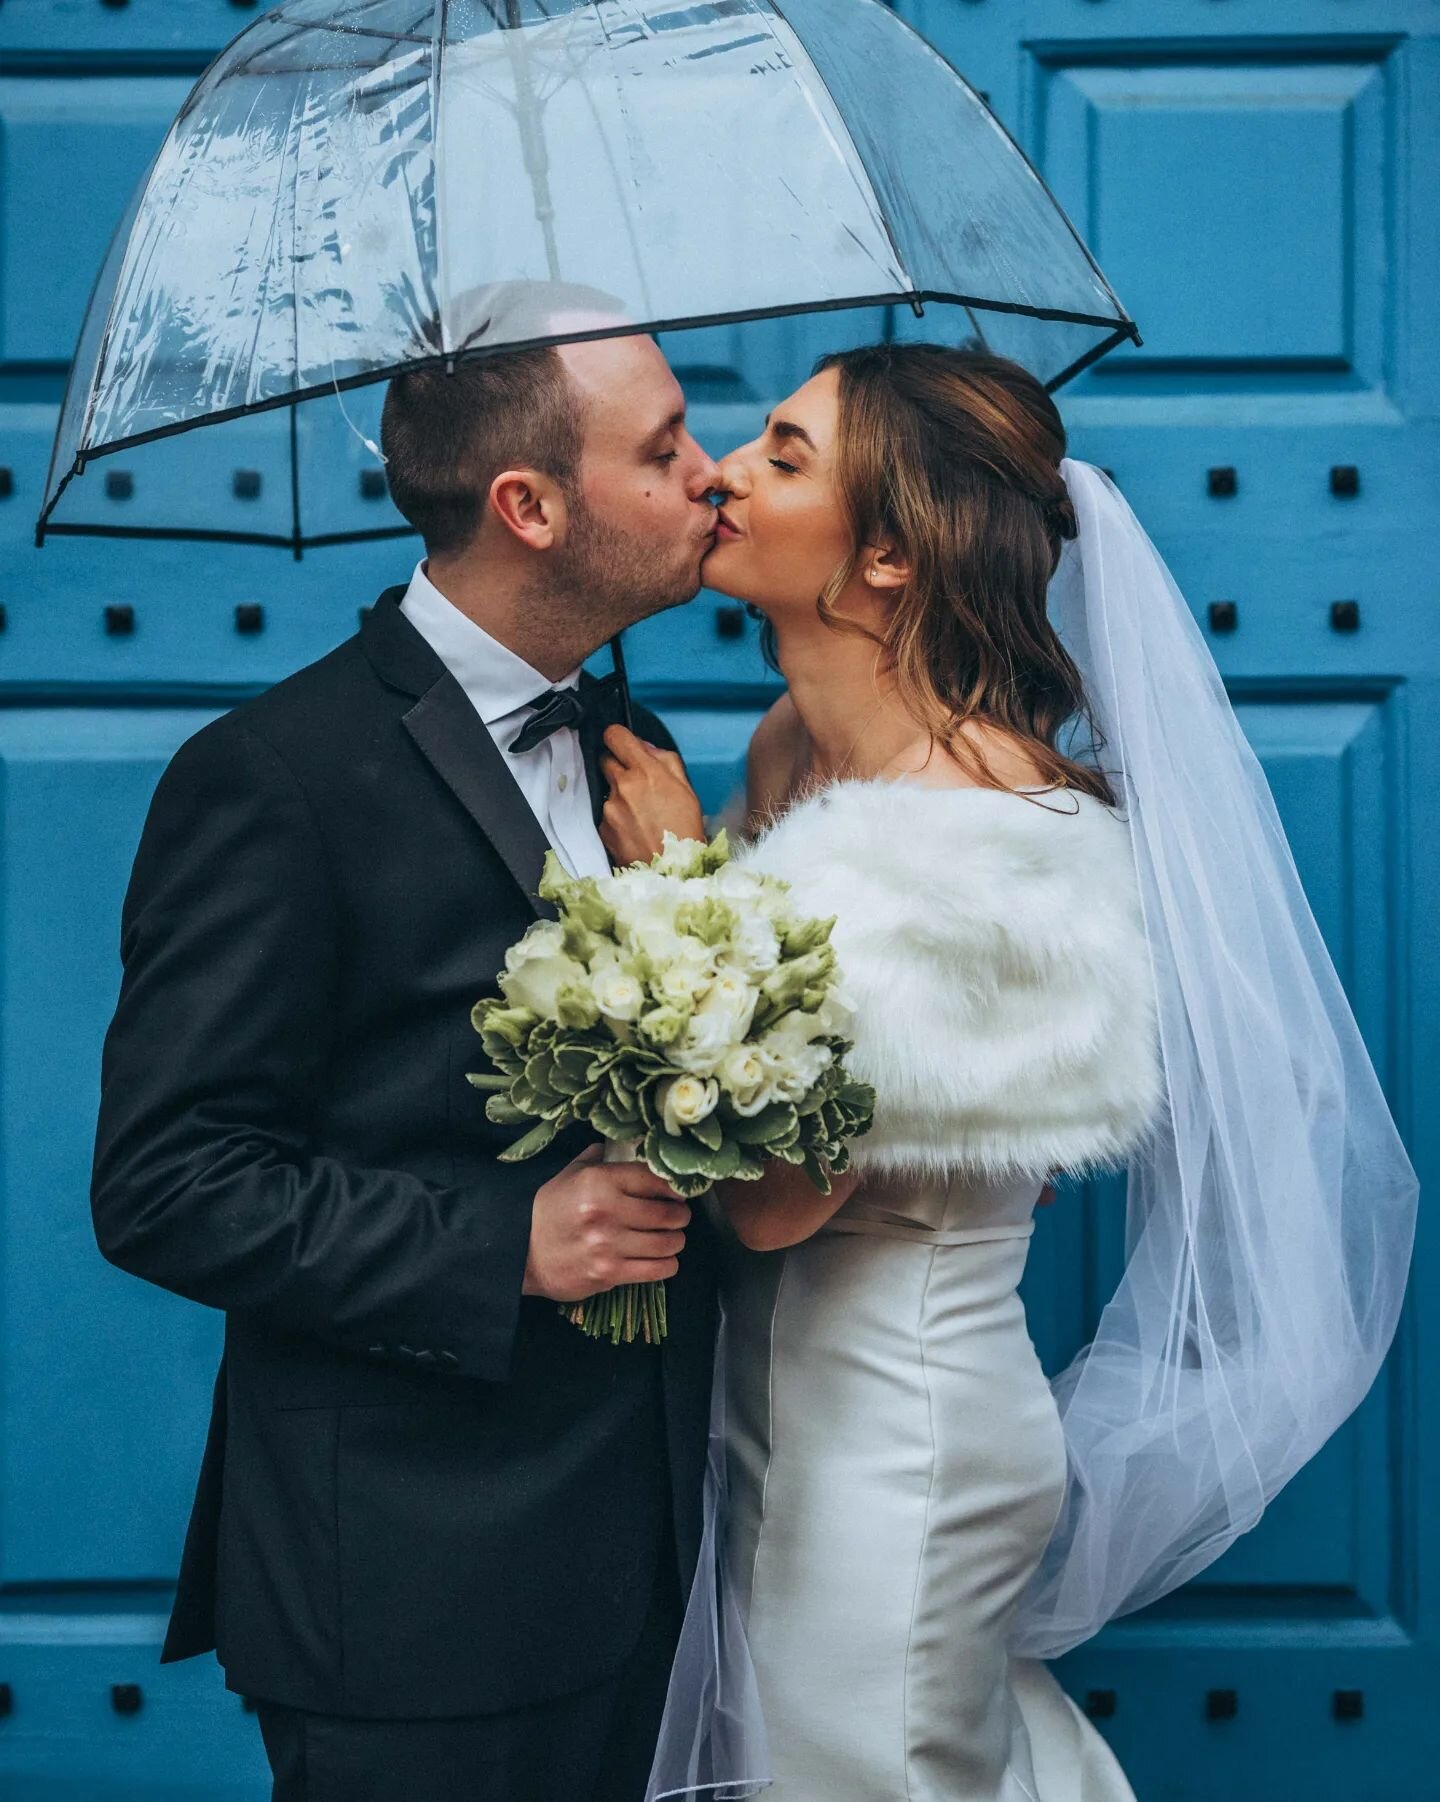 My style of photography is modern, story-telling and all about capturing the little moments and emotions...but with a touch of editorial magic here and there, for easygoing and fun loving couples that desire timeless wedding photography.
If you think